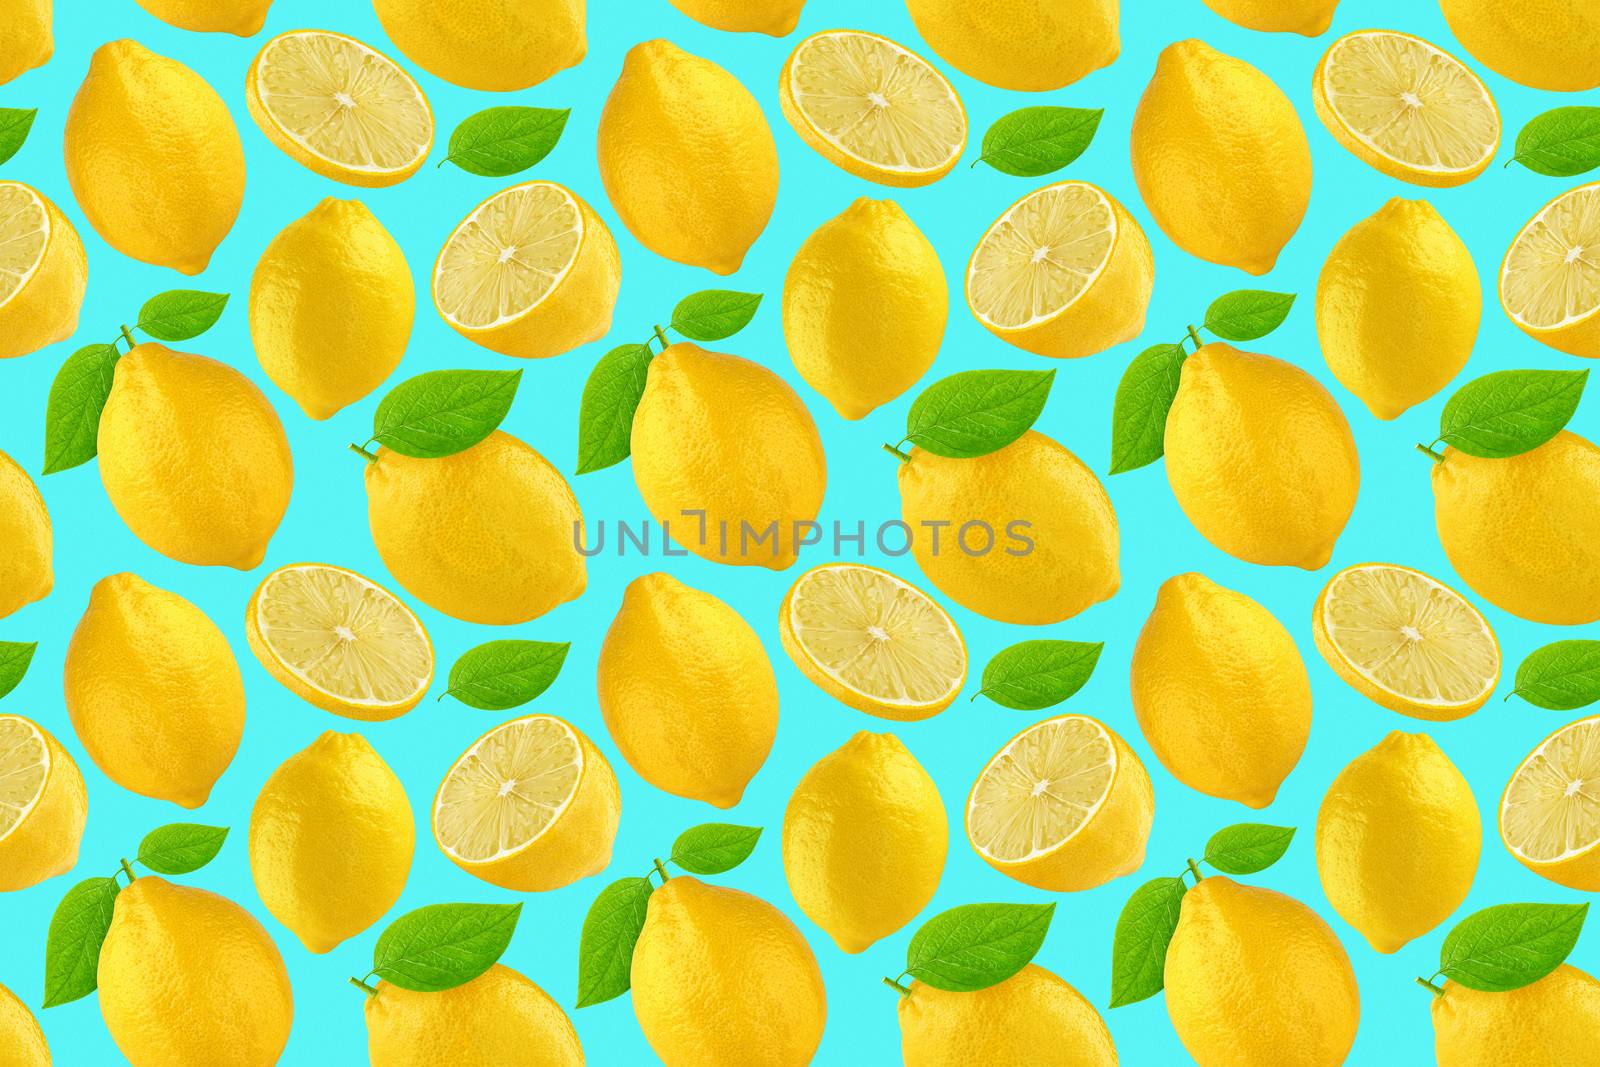 Seamless pattern with lemons. Lemon isolated on blue background with clipping path.